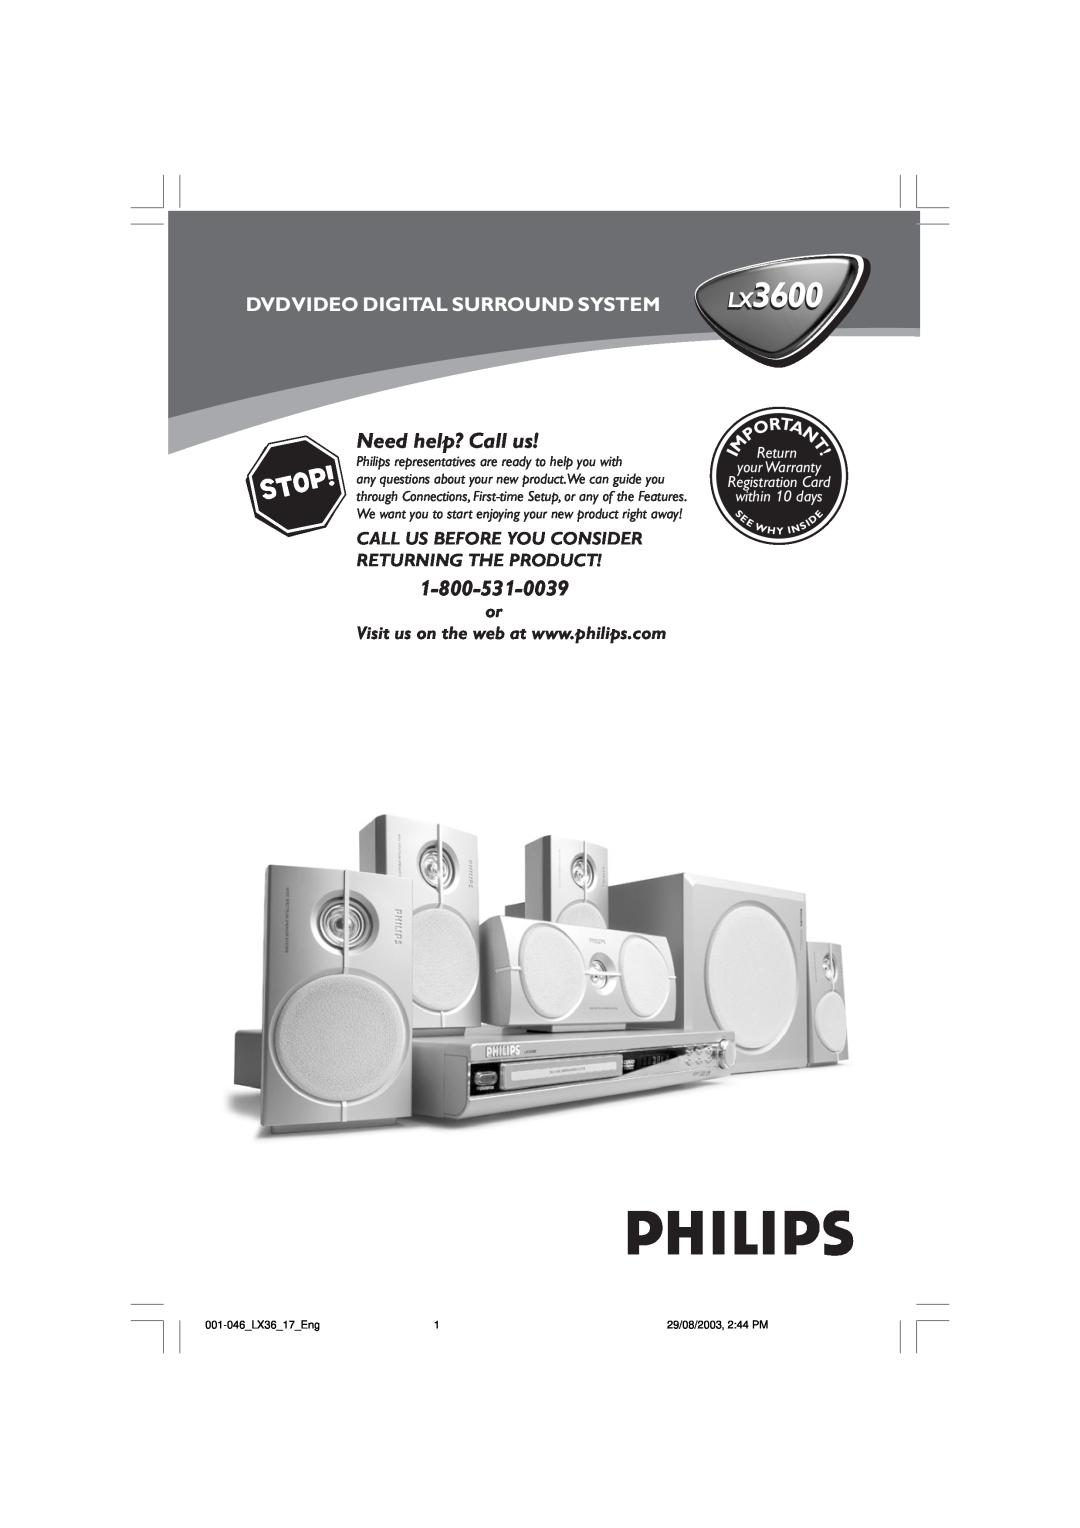 Philips LX3600 warranty Need help? Call us, Dvdvideo Digital Surround System, Return, 001-046 LX36 17 Eng, W H Y In 